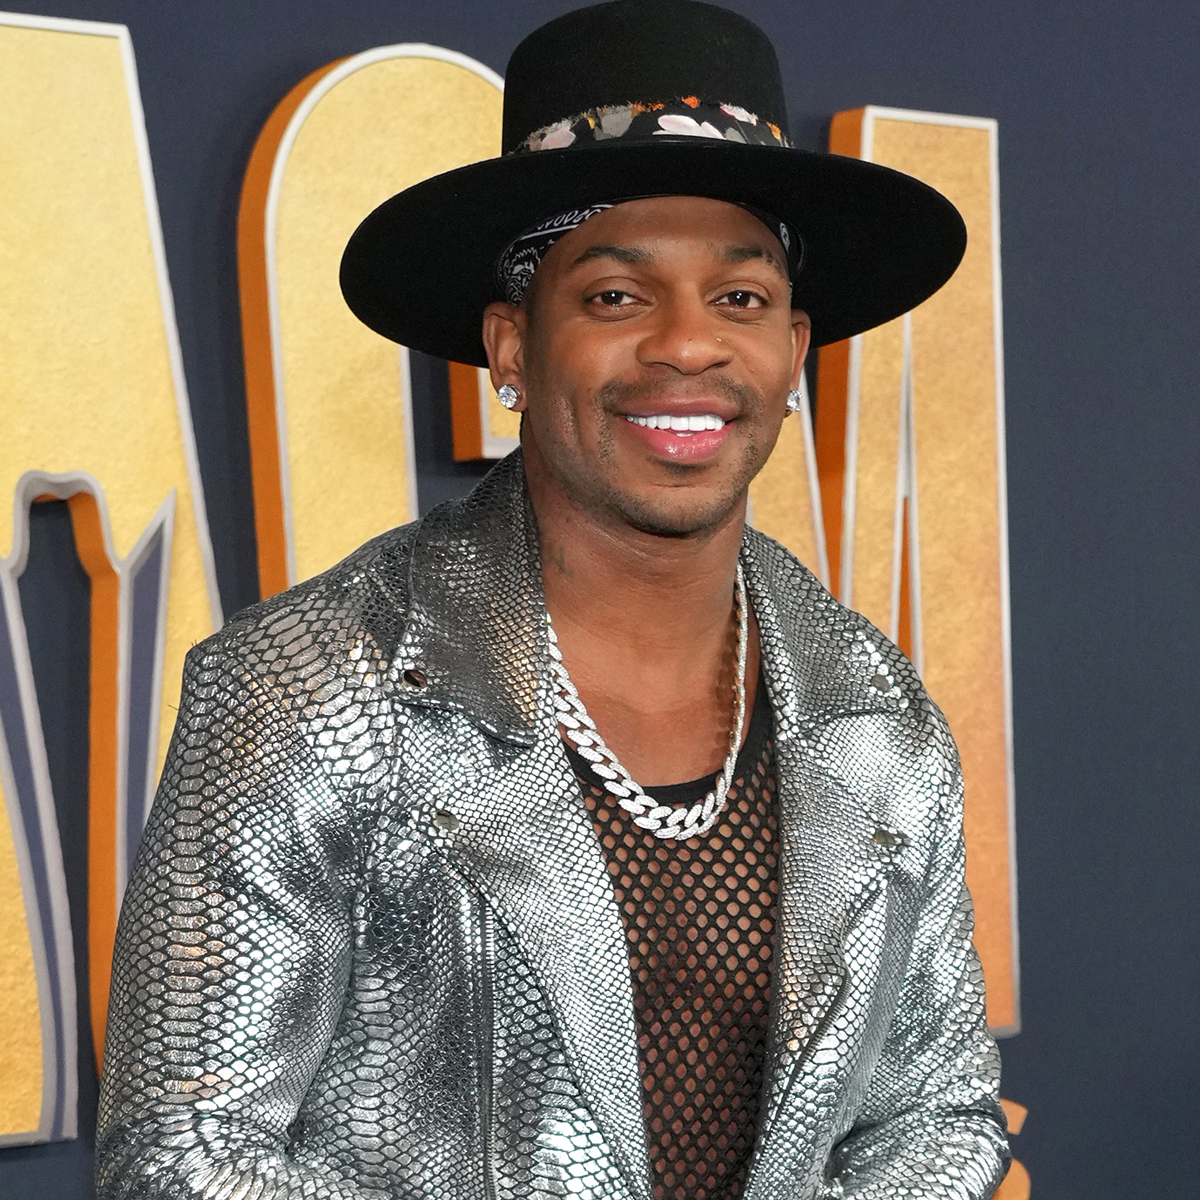 Host Jimmie Allen Wears Sheer Top to ACM Awards 2022, Wife Alexis Gale  Joins Him on Red Carpet: Photo 4718089, 2022 ACM Awards, ACM Awards,  Alexis Gale, Jimmie Allen Photos